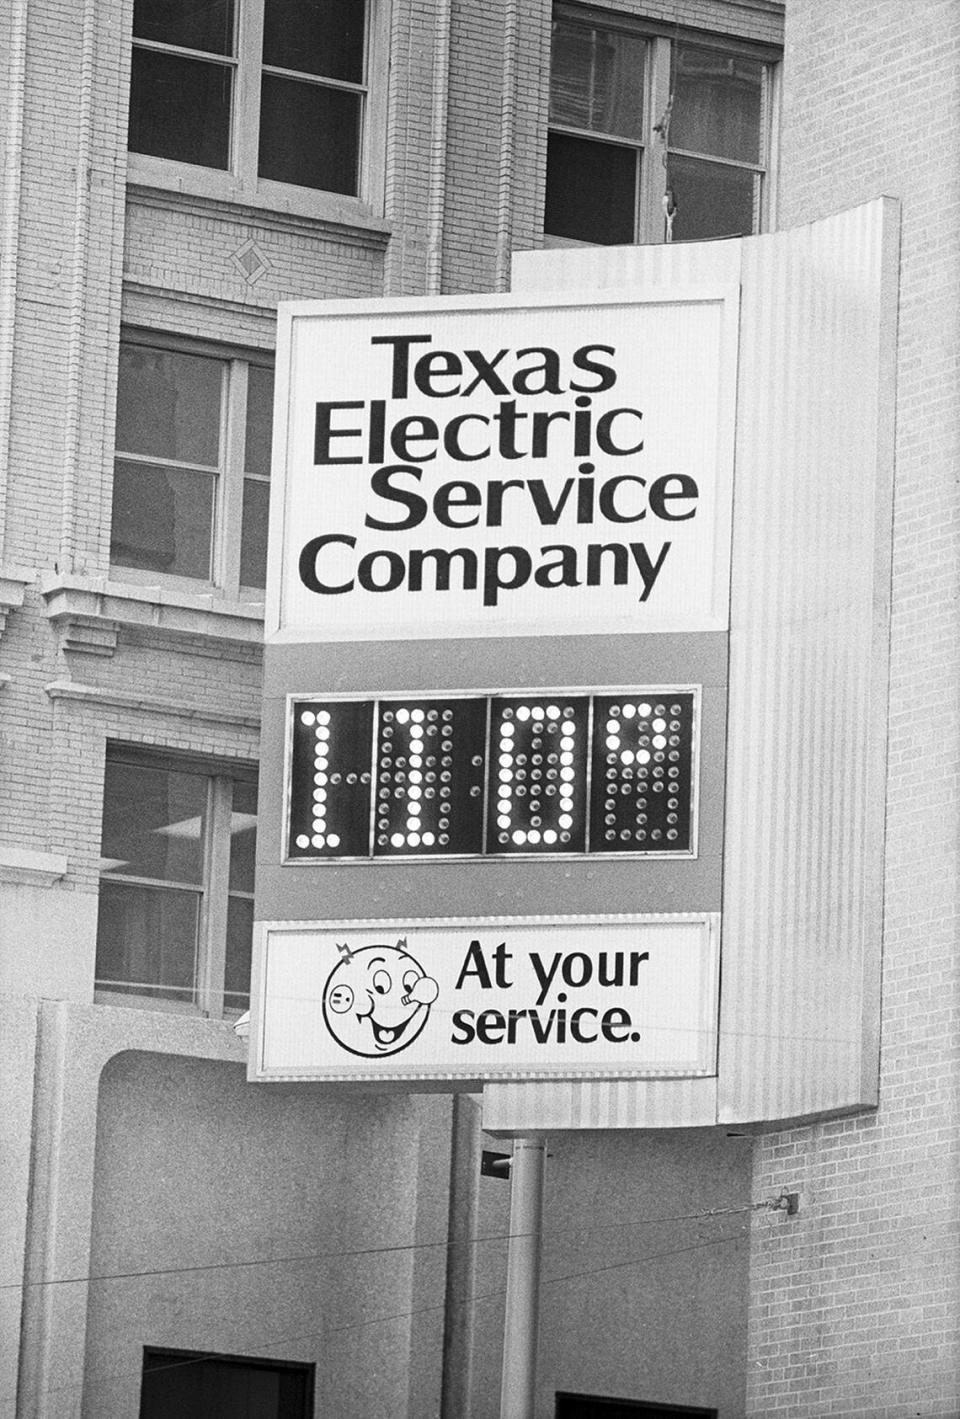 June 26, 1980: The temperature gauge reads 110 degrees on the Texas Electric Service Co. sign in downtown Fort Worth. Vince Heptig/Fort Worth Star-Telegram archive/UT Arlington Special Collections